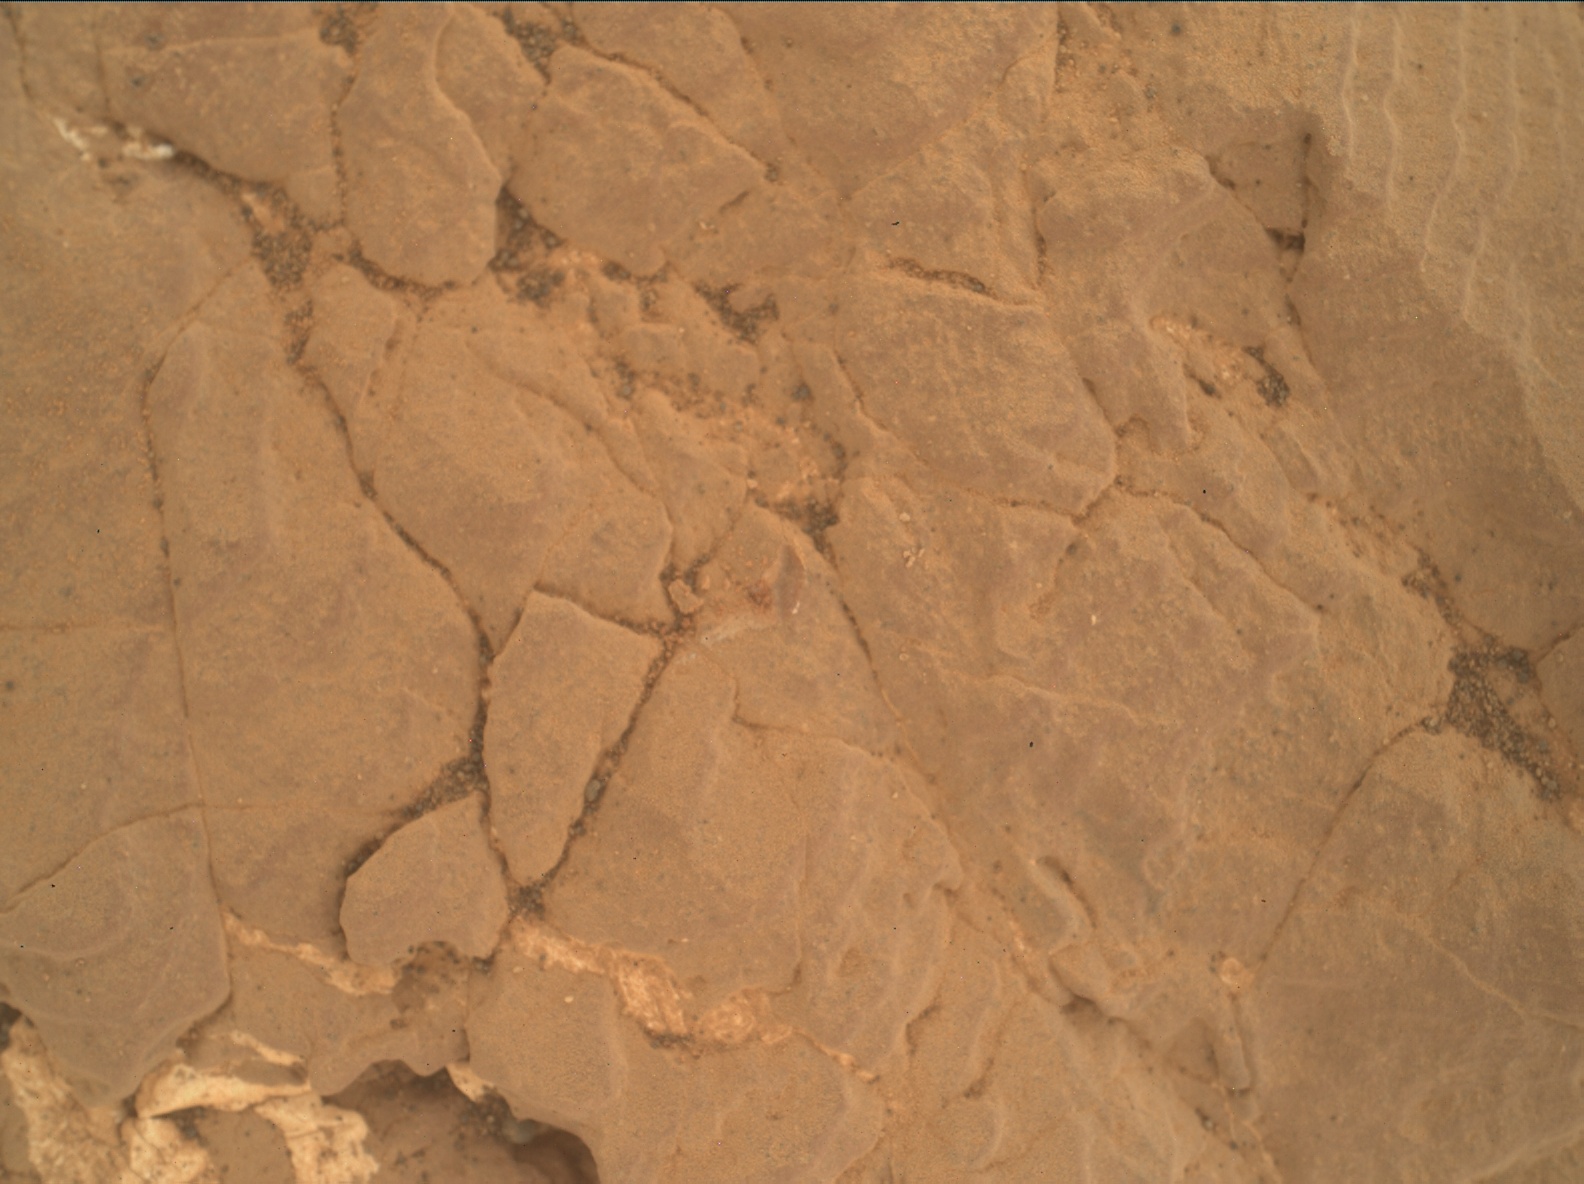 Nasa's Mars rover Curiosity acquired this image using its Mars Hand Lens Imager (MAHLI) on Sol 2382